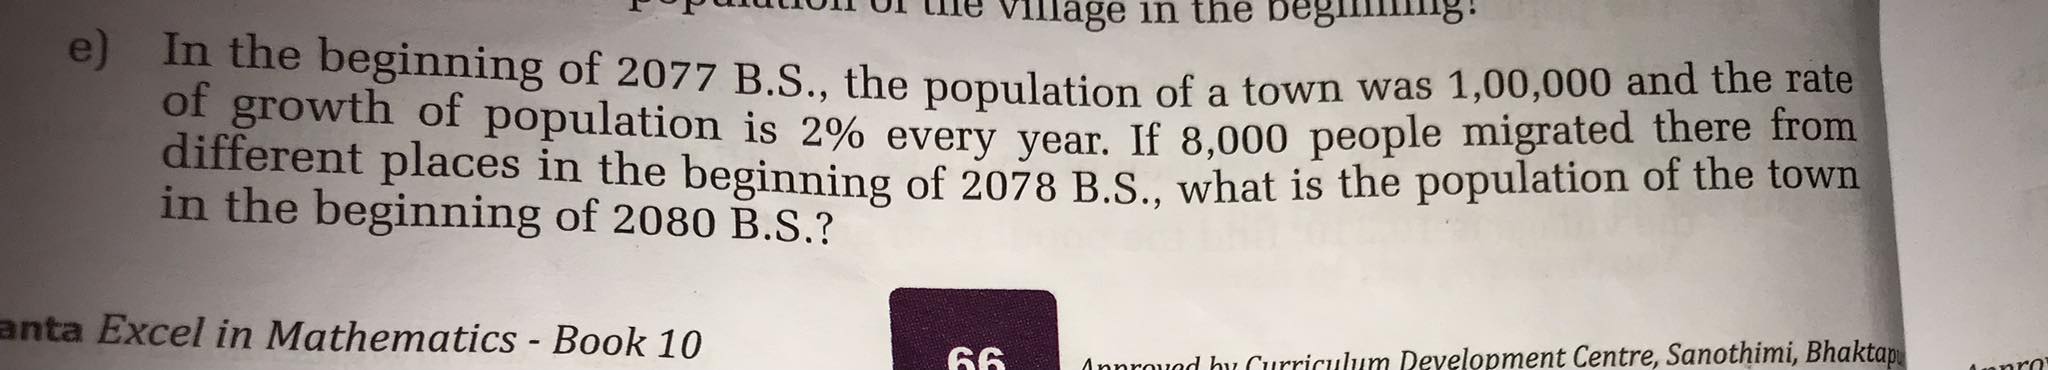 e) In the beginning of 2077 B.S., the population of a town was 1,00,00